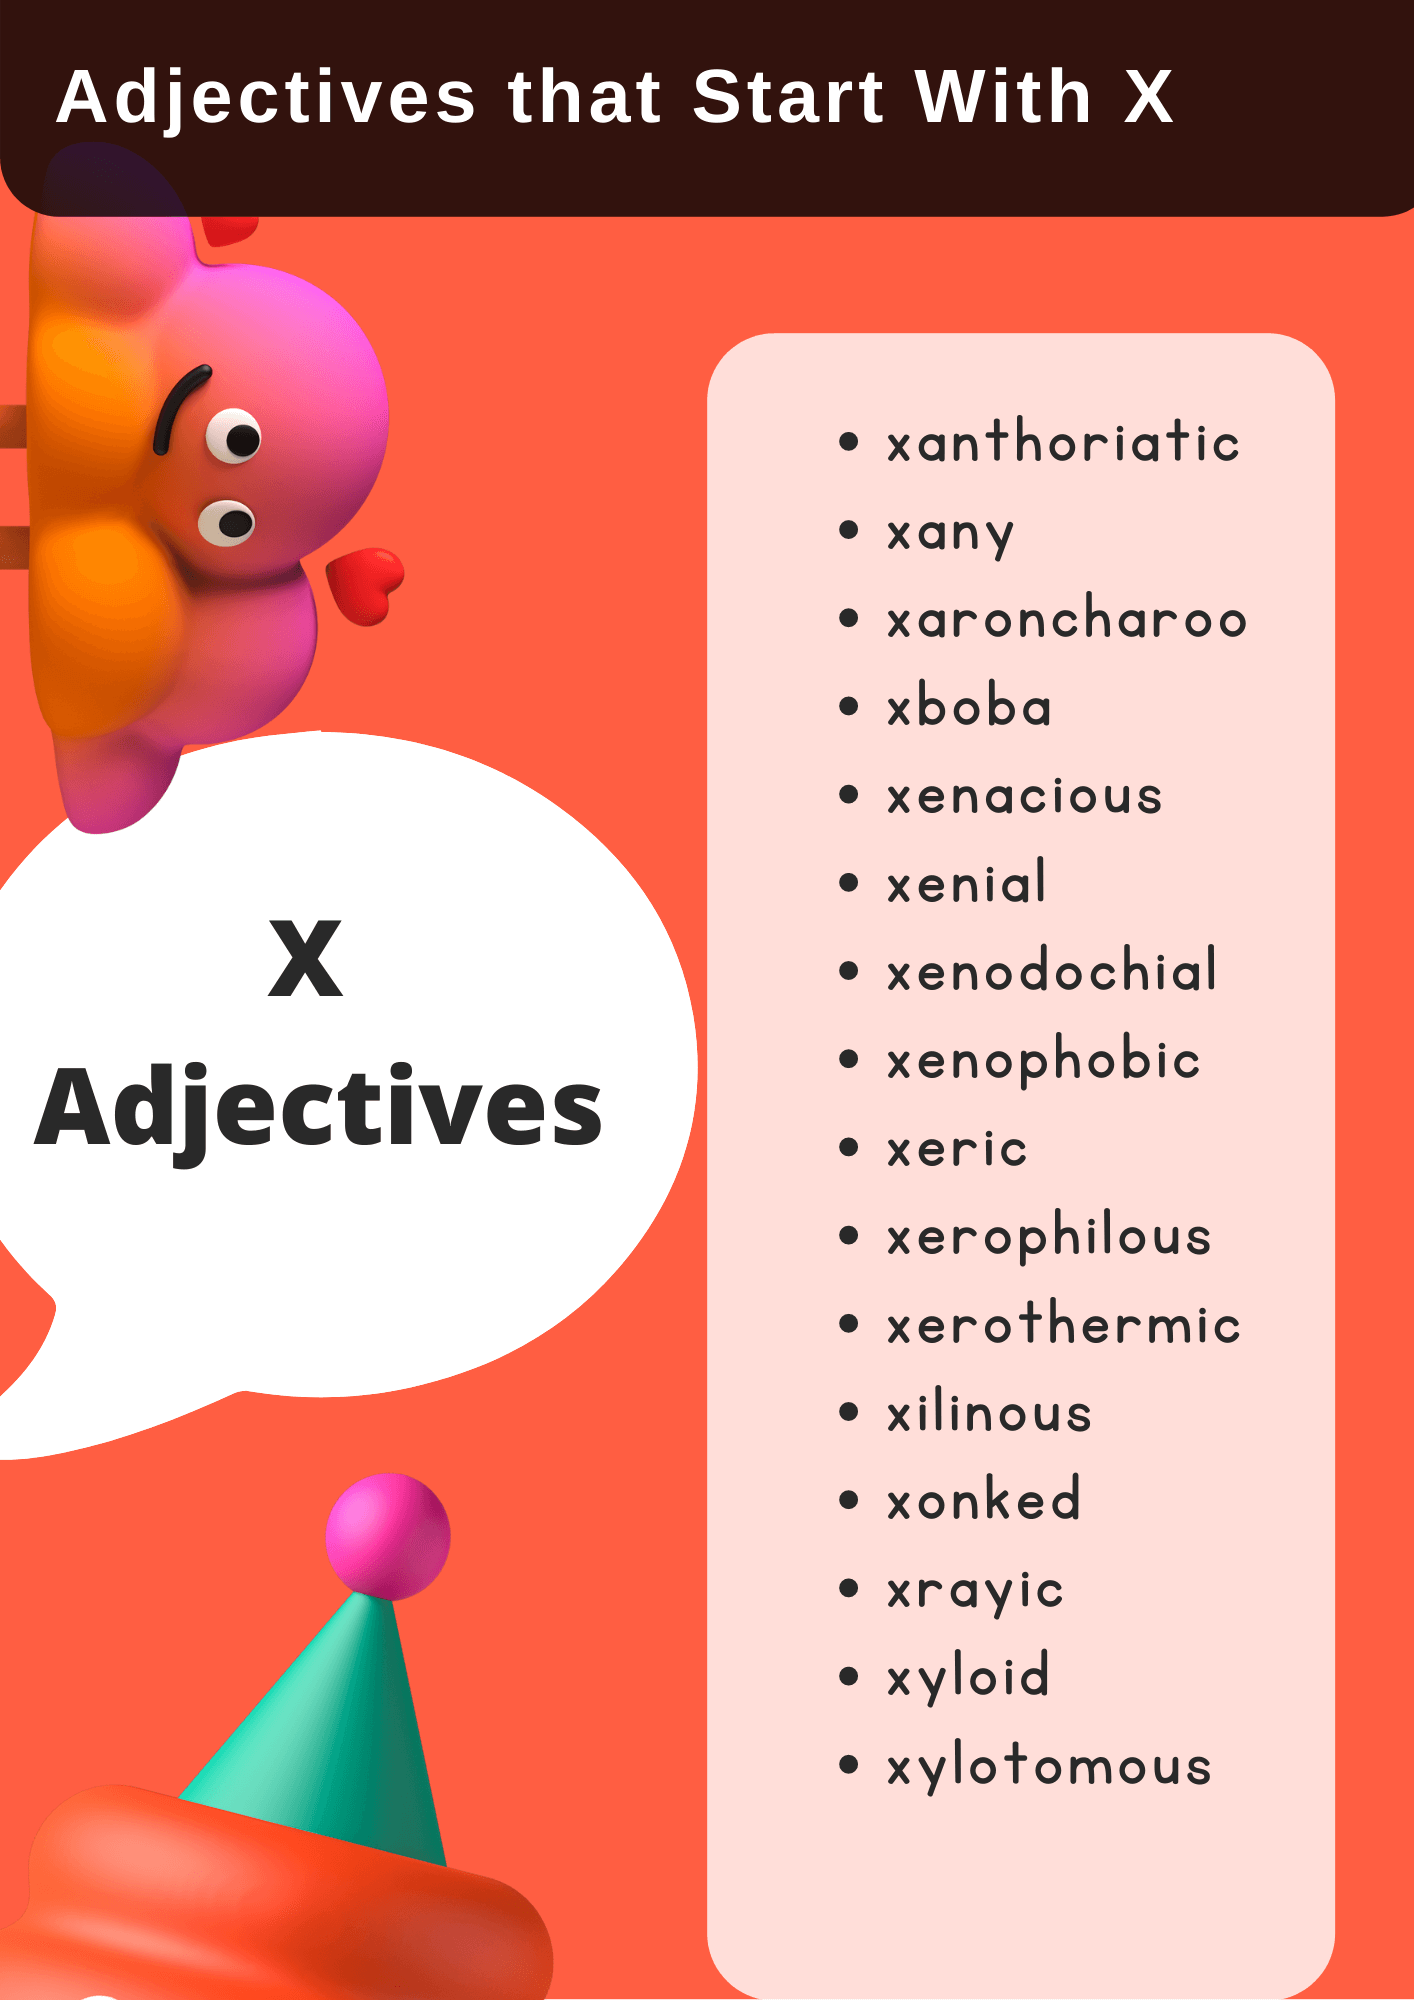 Adjectives that Start with x